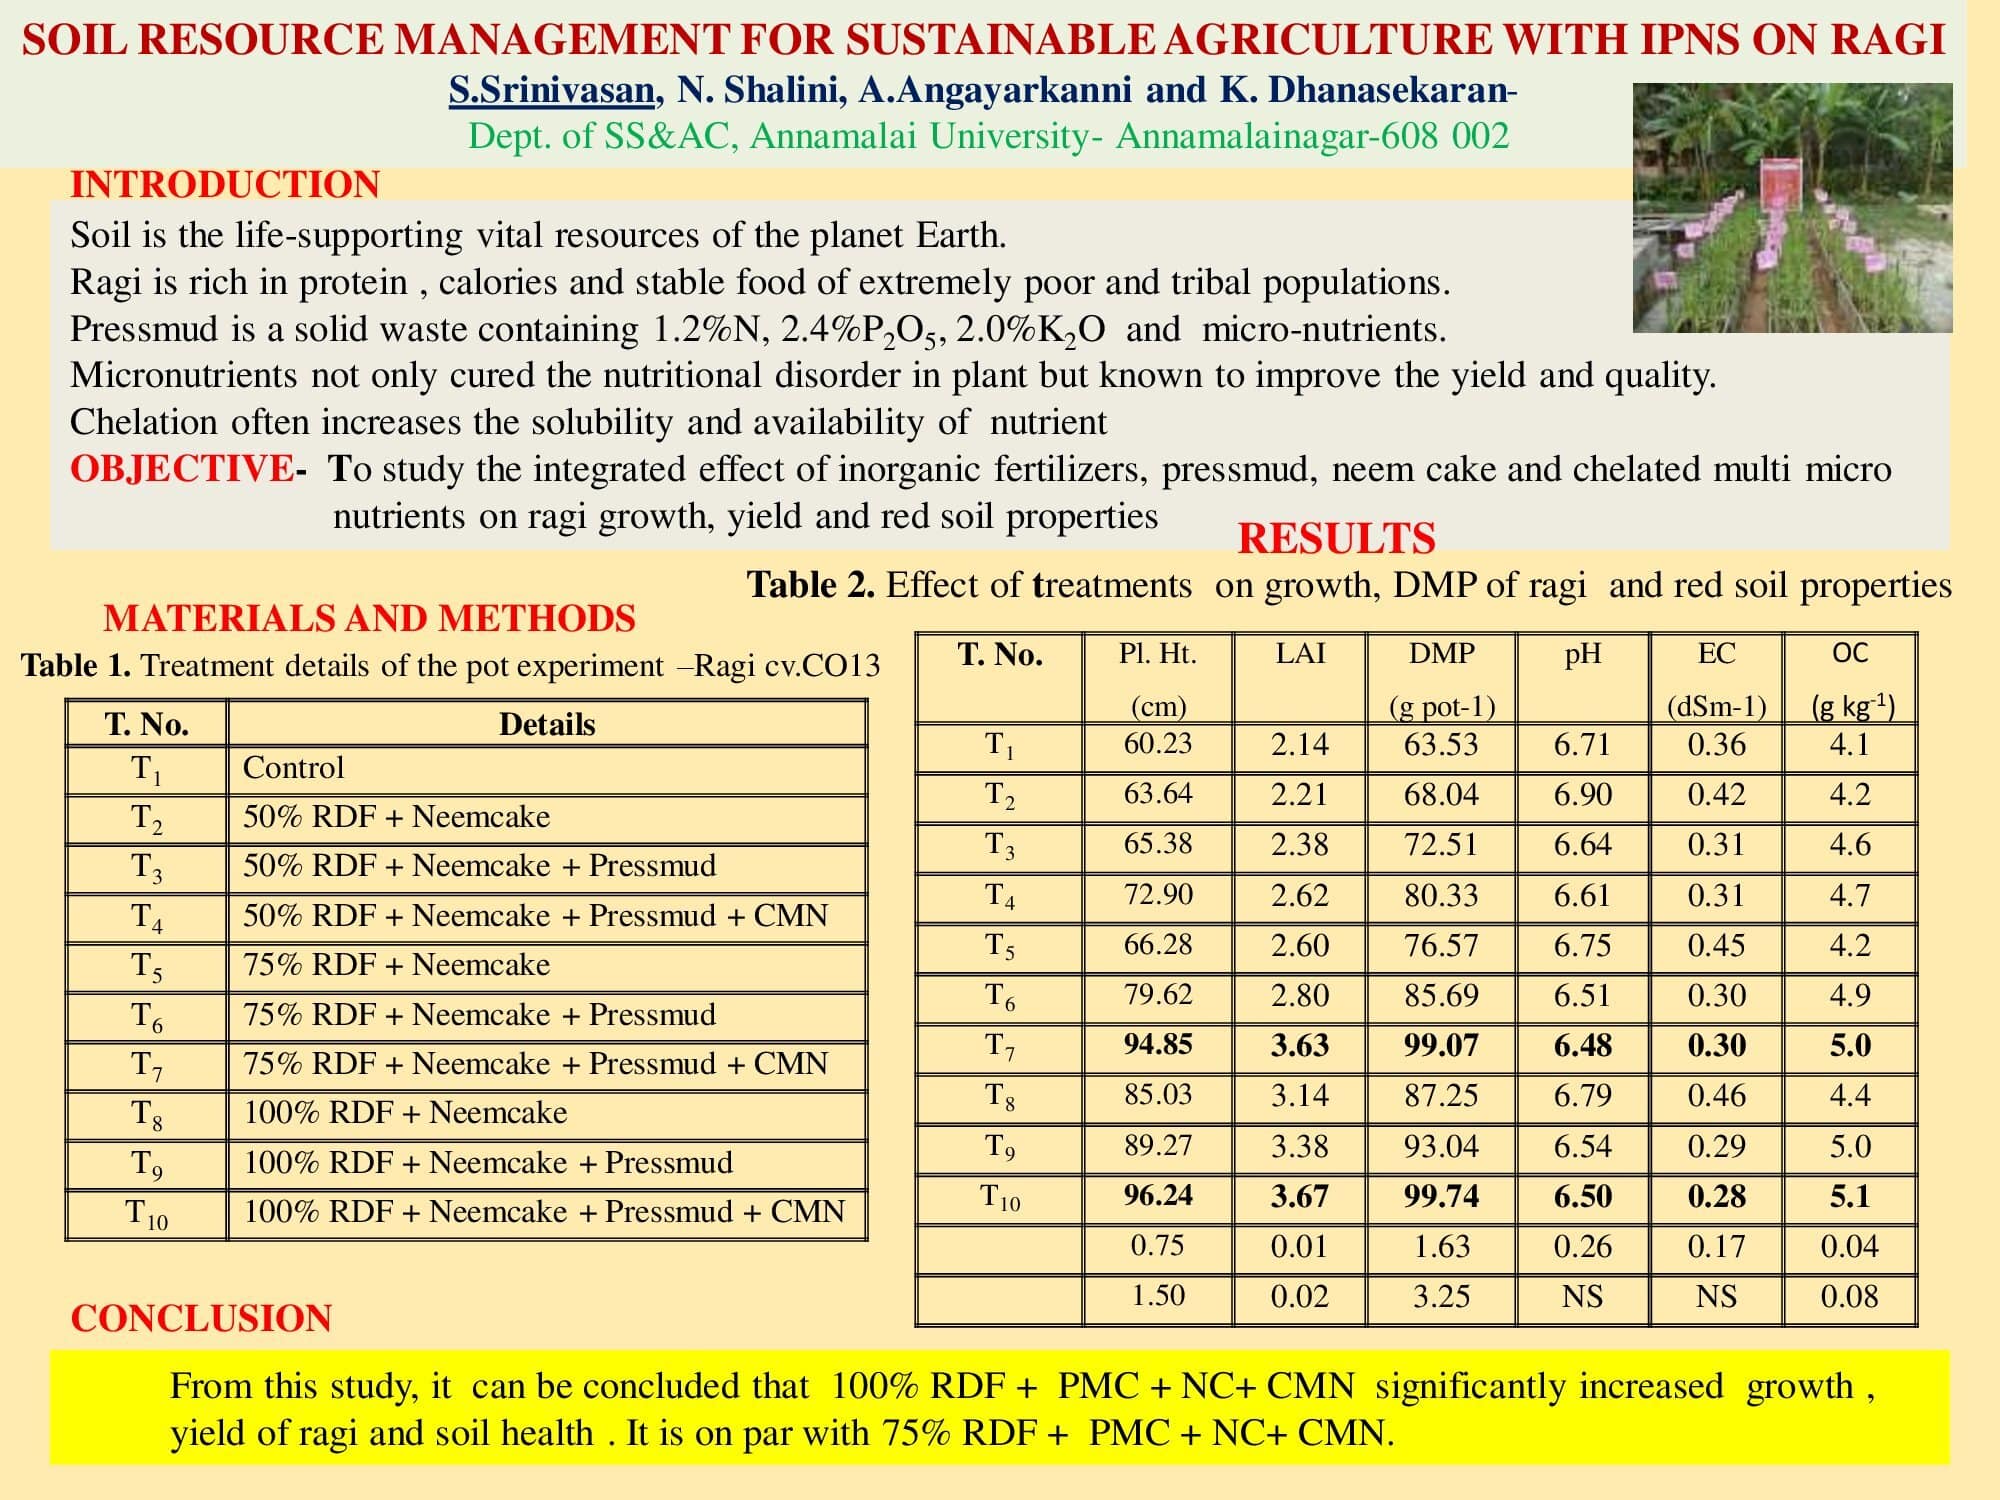 Soil resource management for sustainable agriculture with IPNS on ragi